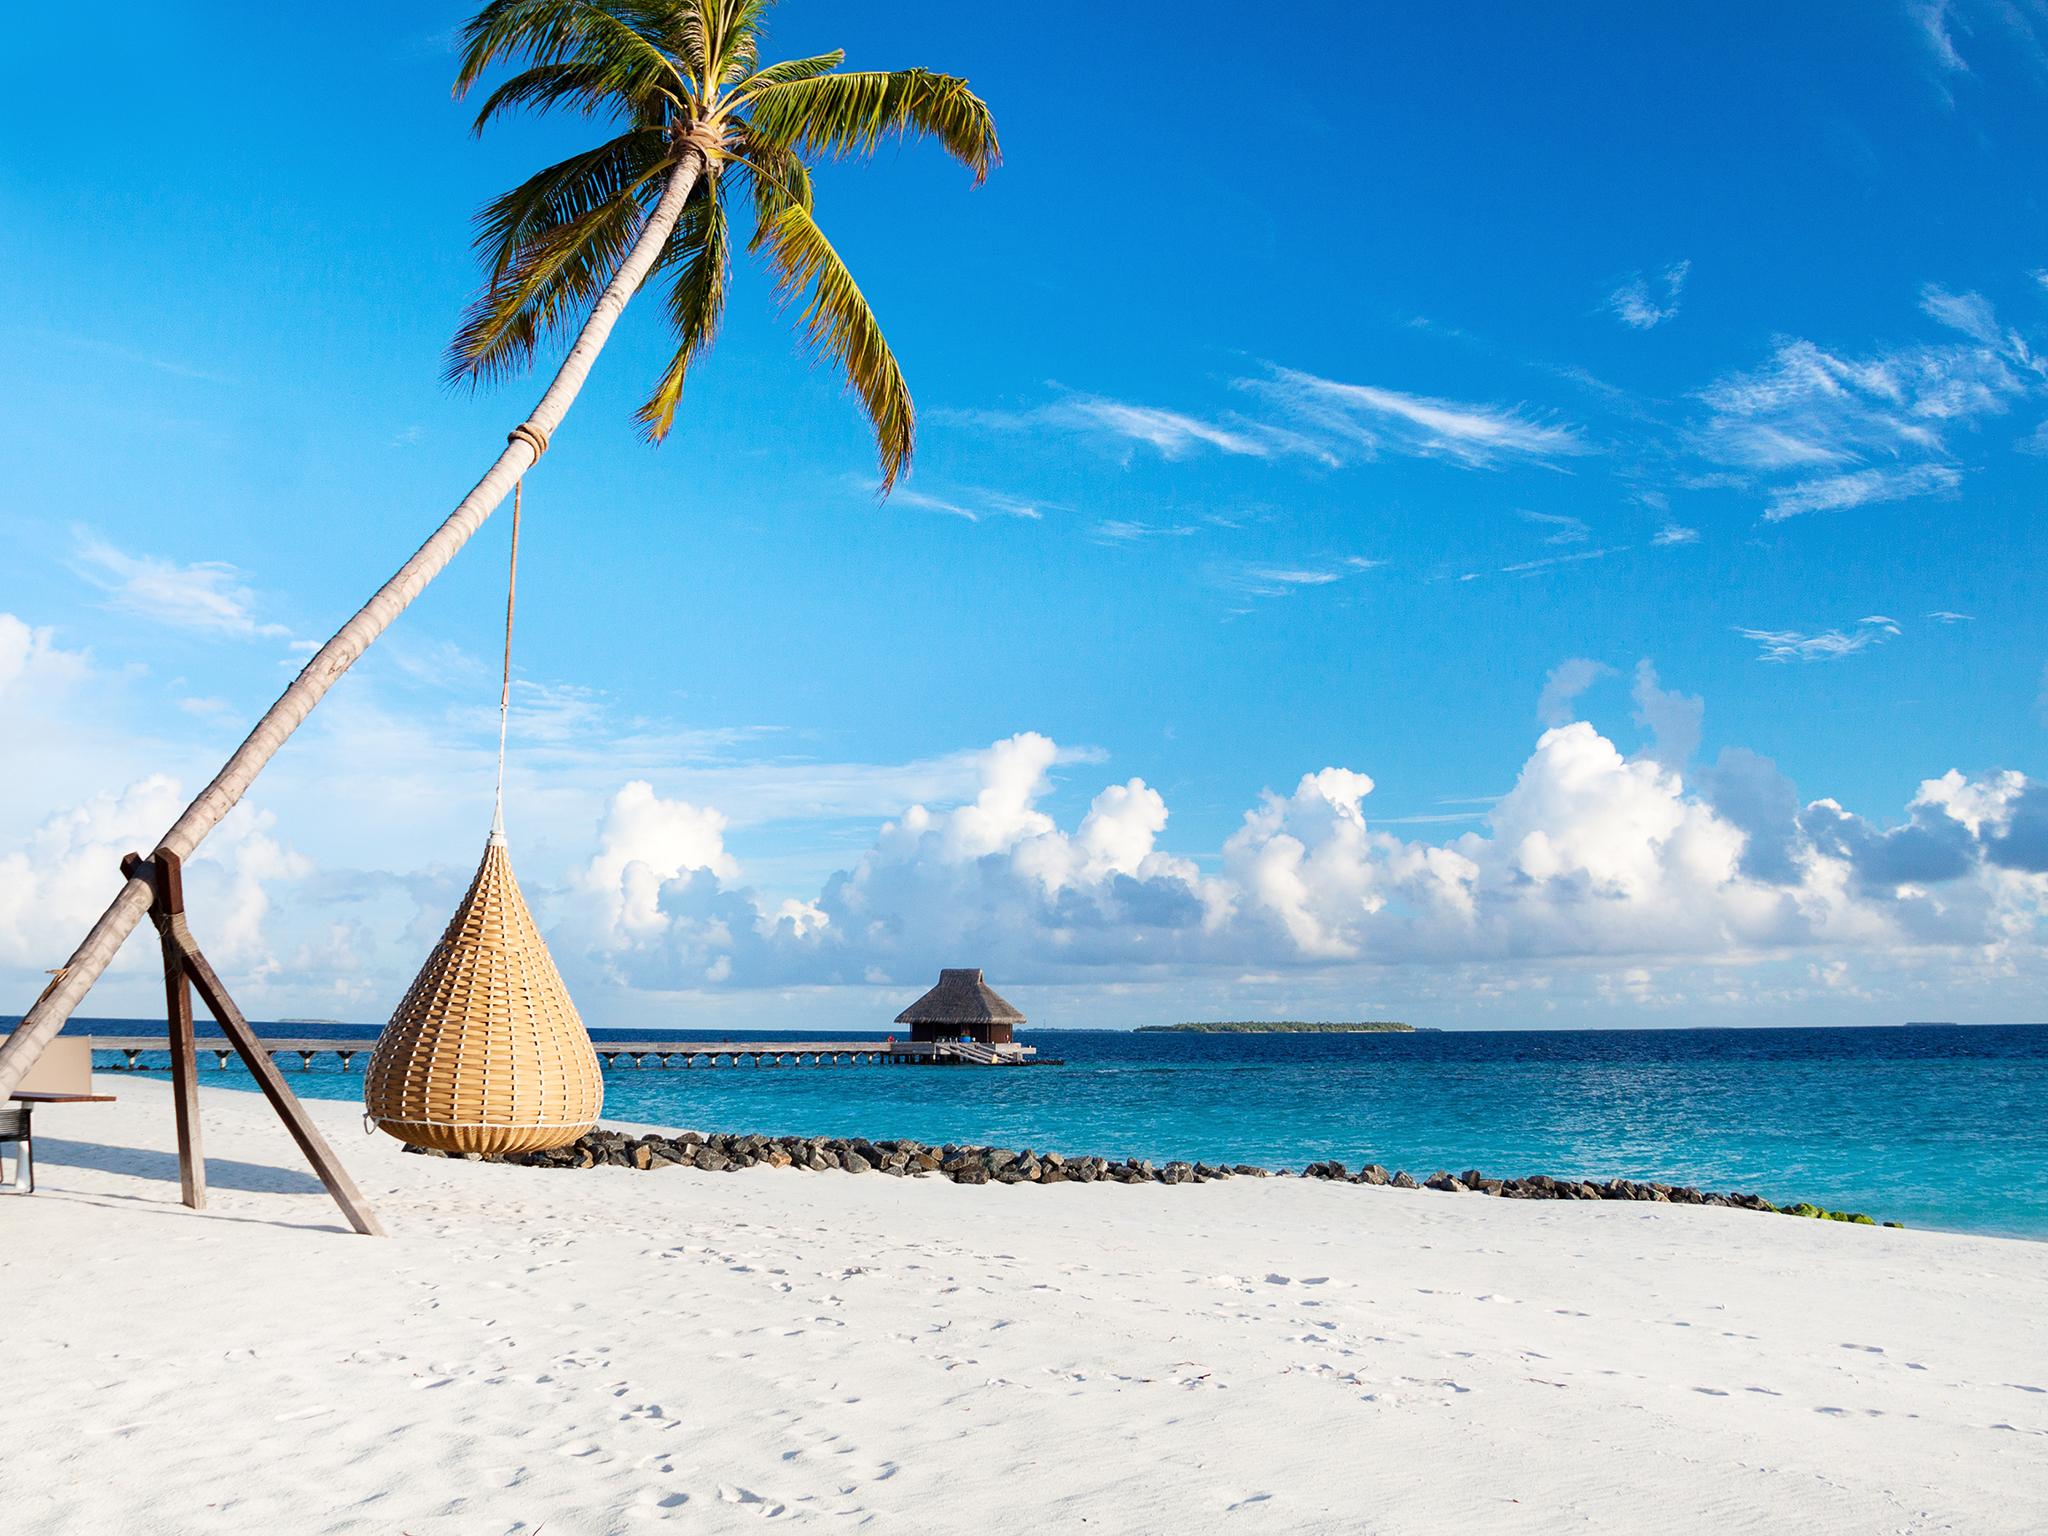 Maldives is known for its incredible reefs, luxury resorts and blue lagoons